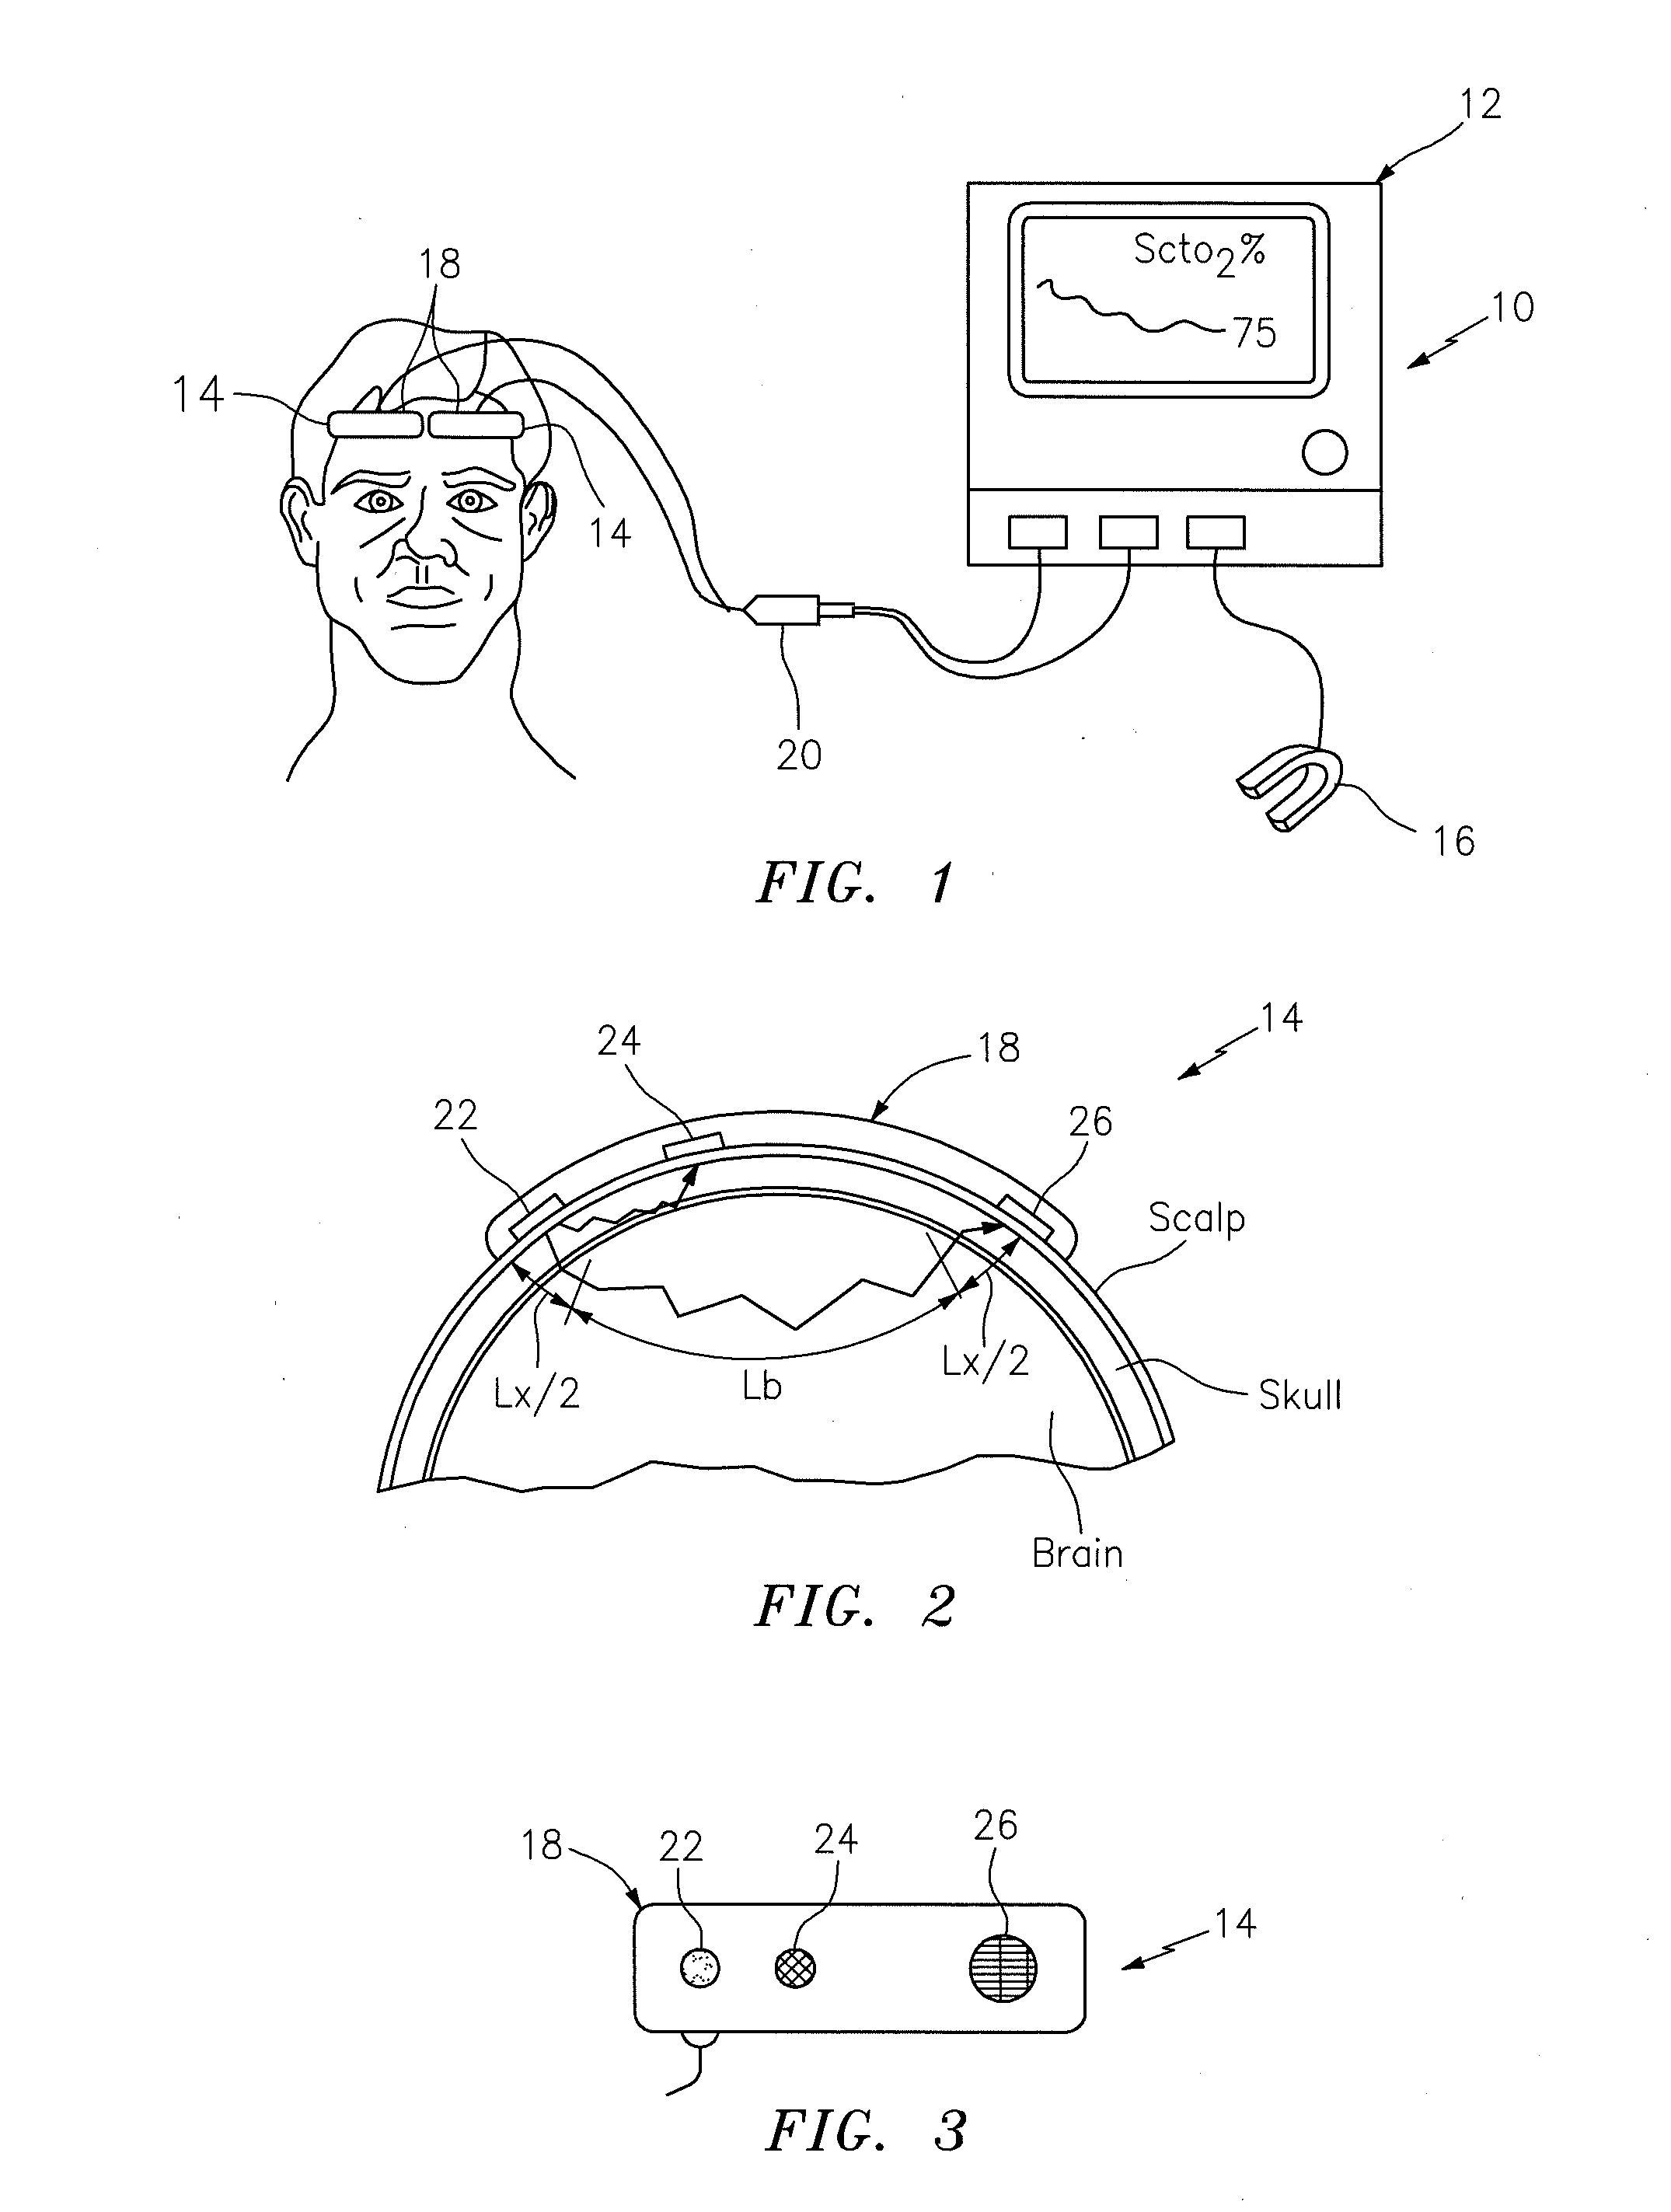 Apparatus and method for non-invasively determining oxygen saturation of venous blood and cardiac output using nirs